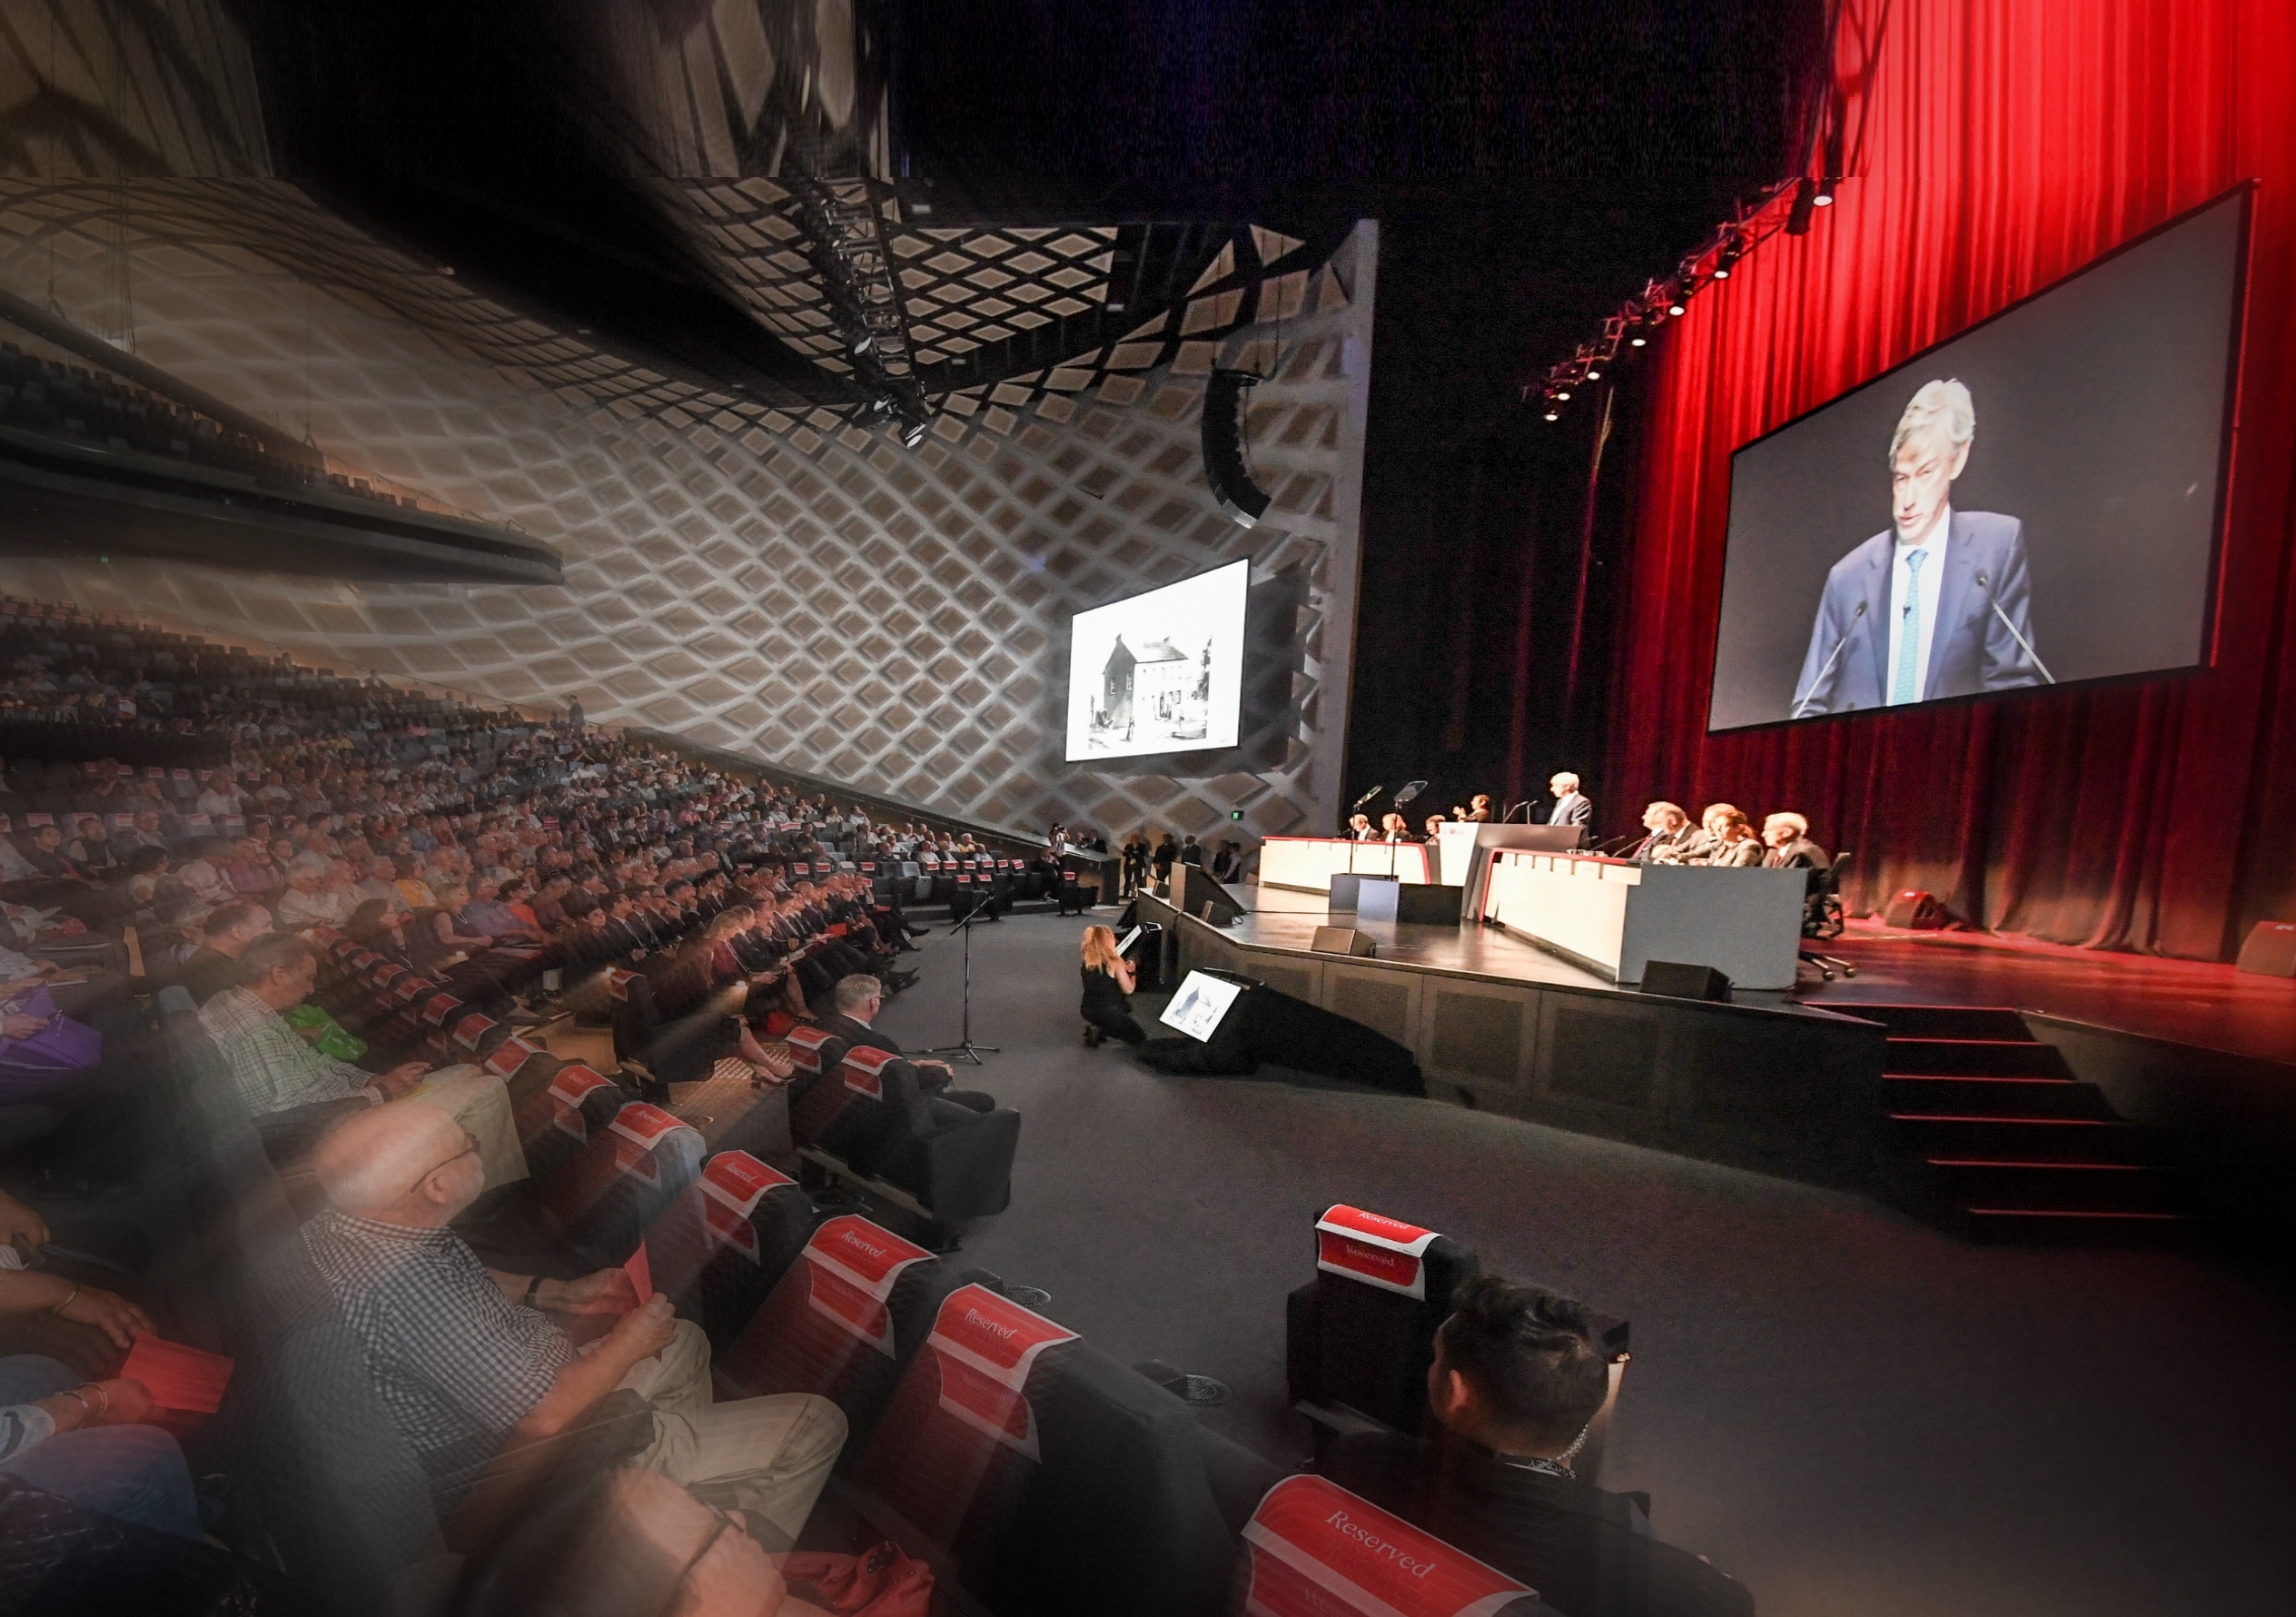 Westpac’s 2017 AGM. The questions at this one will be tougher. Shareholders will wade through a financial report 154 pages long. Photo: Peter Rae/AAP